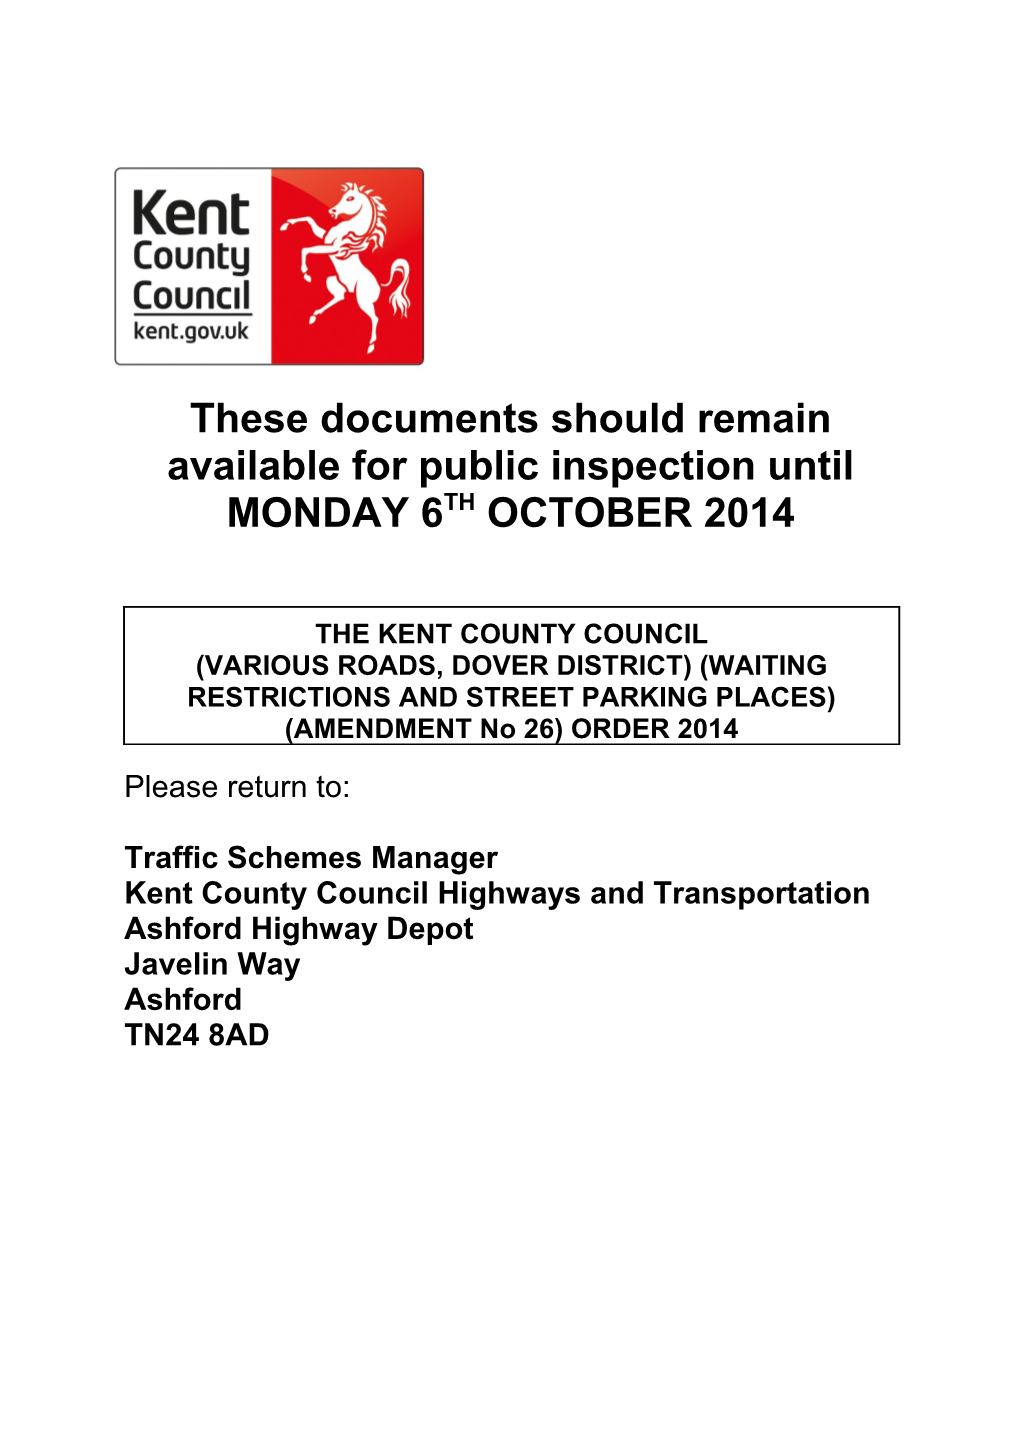 These Documents Should Remain Available for Public Inspection Until MONDAY 6TH OCTOBER 2014